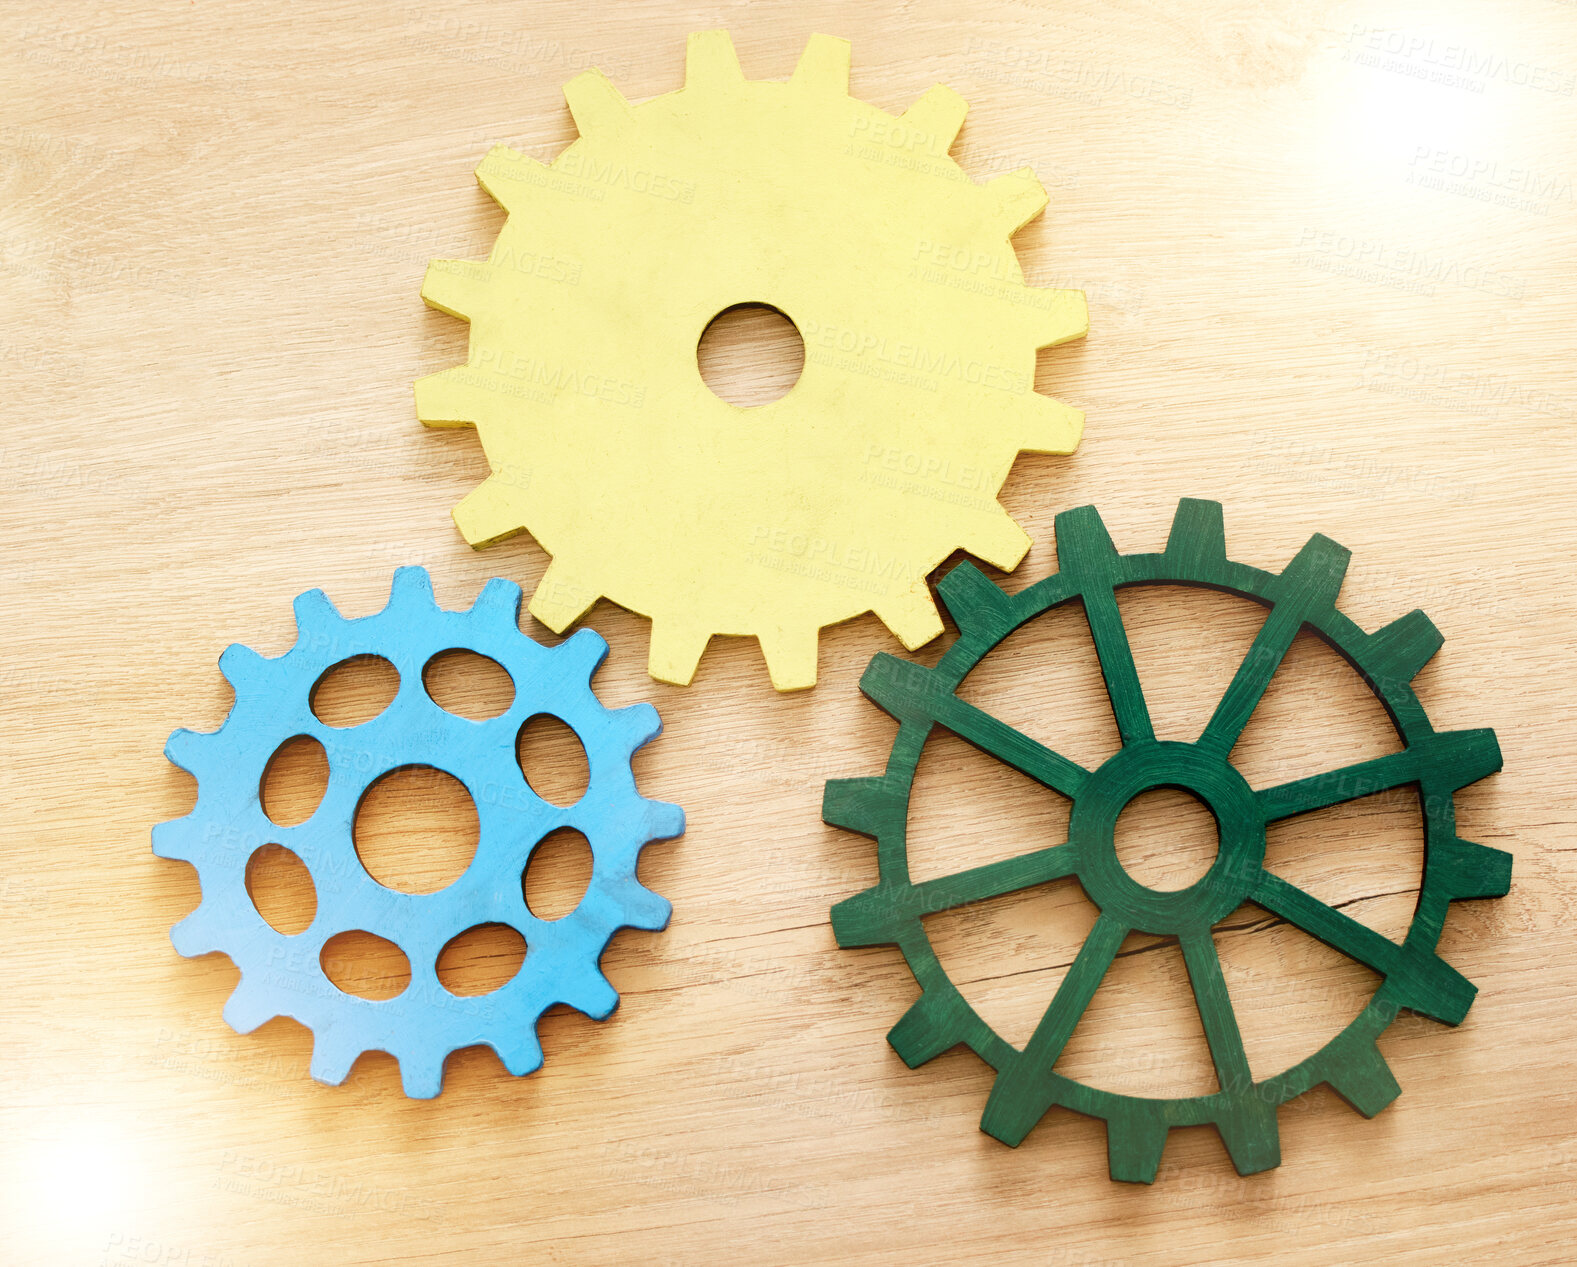 Buy stock photo Collaboration, engineering and construction concept with industrial gears, mechanics and cogs on a table or desk in an office. Teamwork, synergy and industry with the idea of building or design